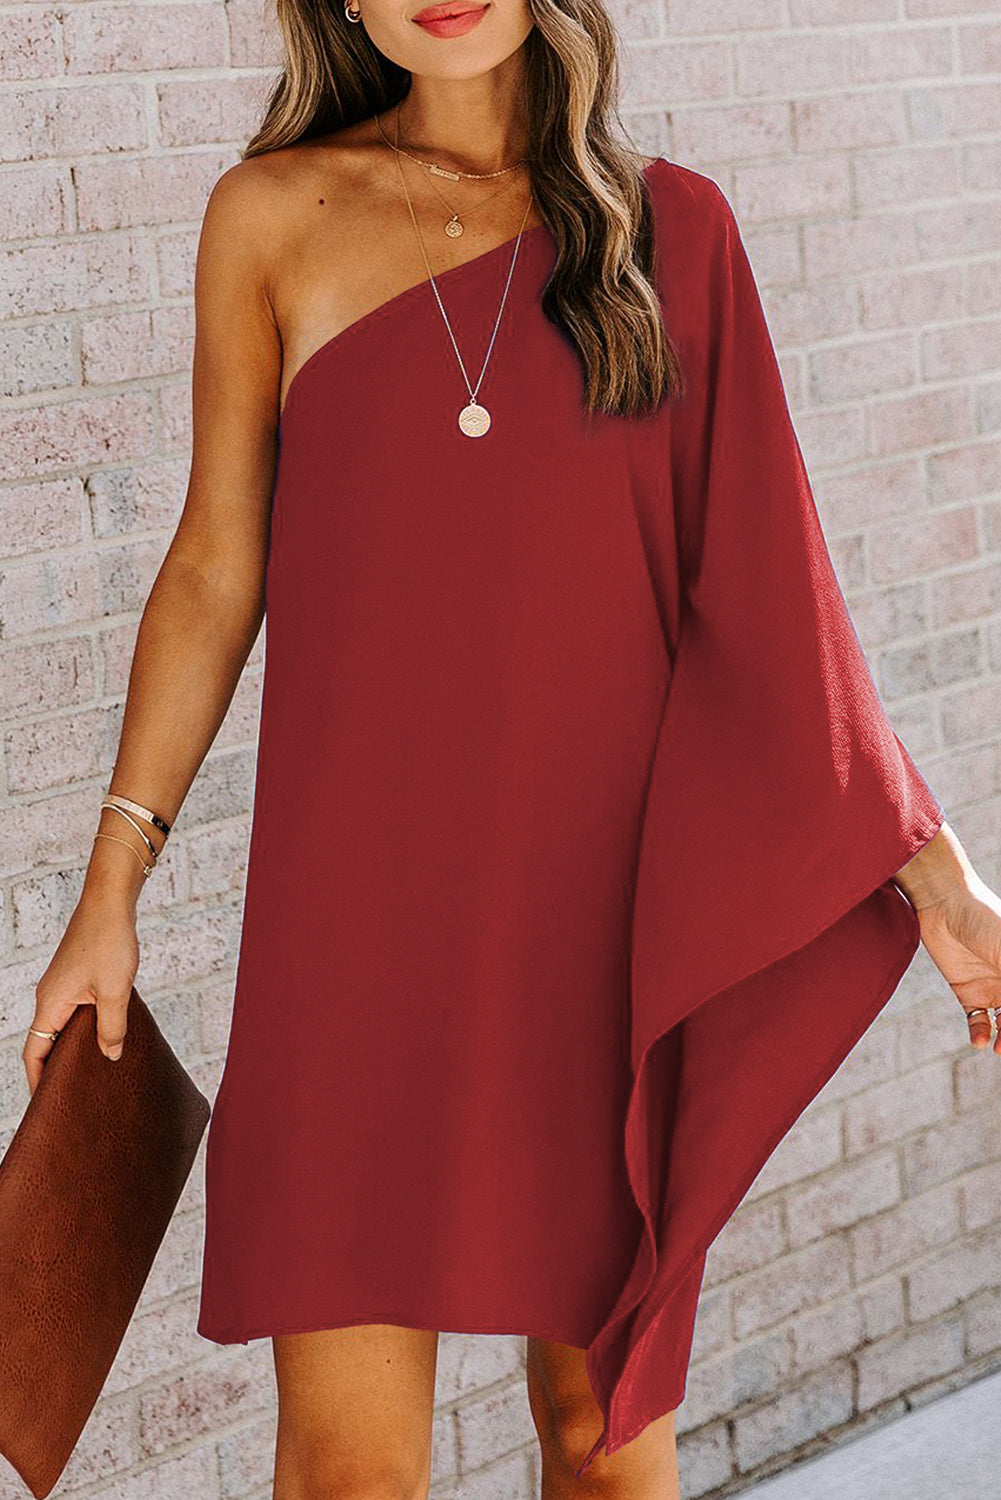 Red Solid Color One Shoulder Batwing Sleeve Mini Dress